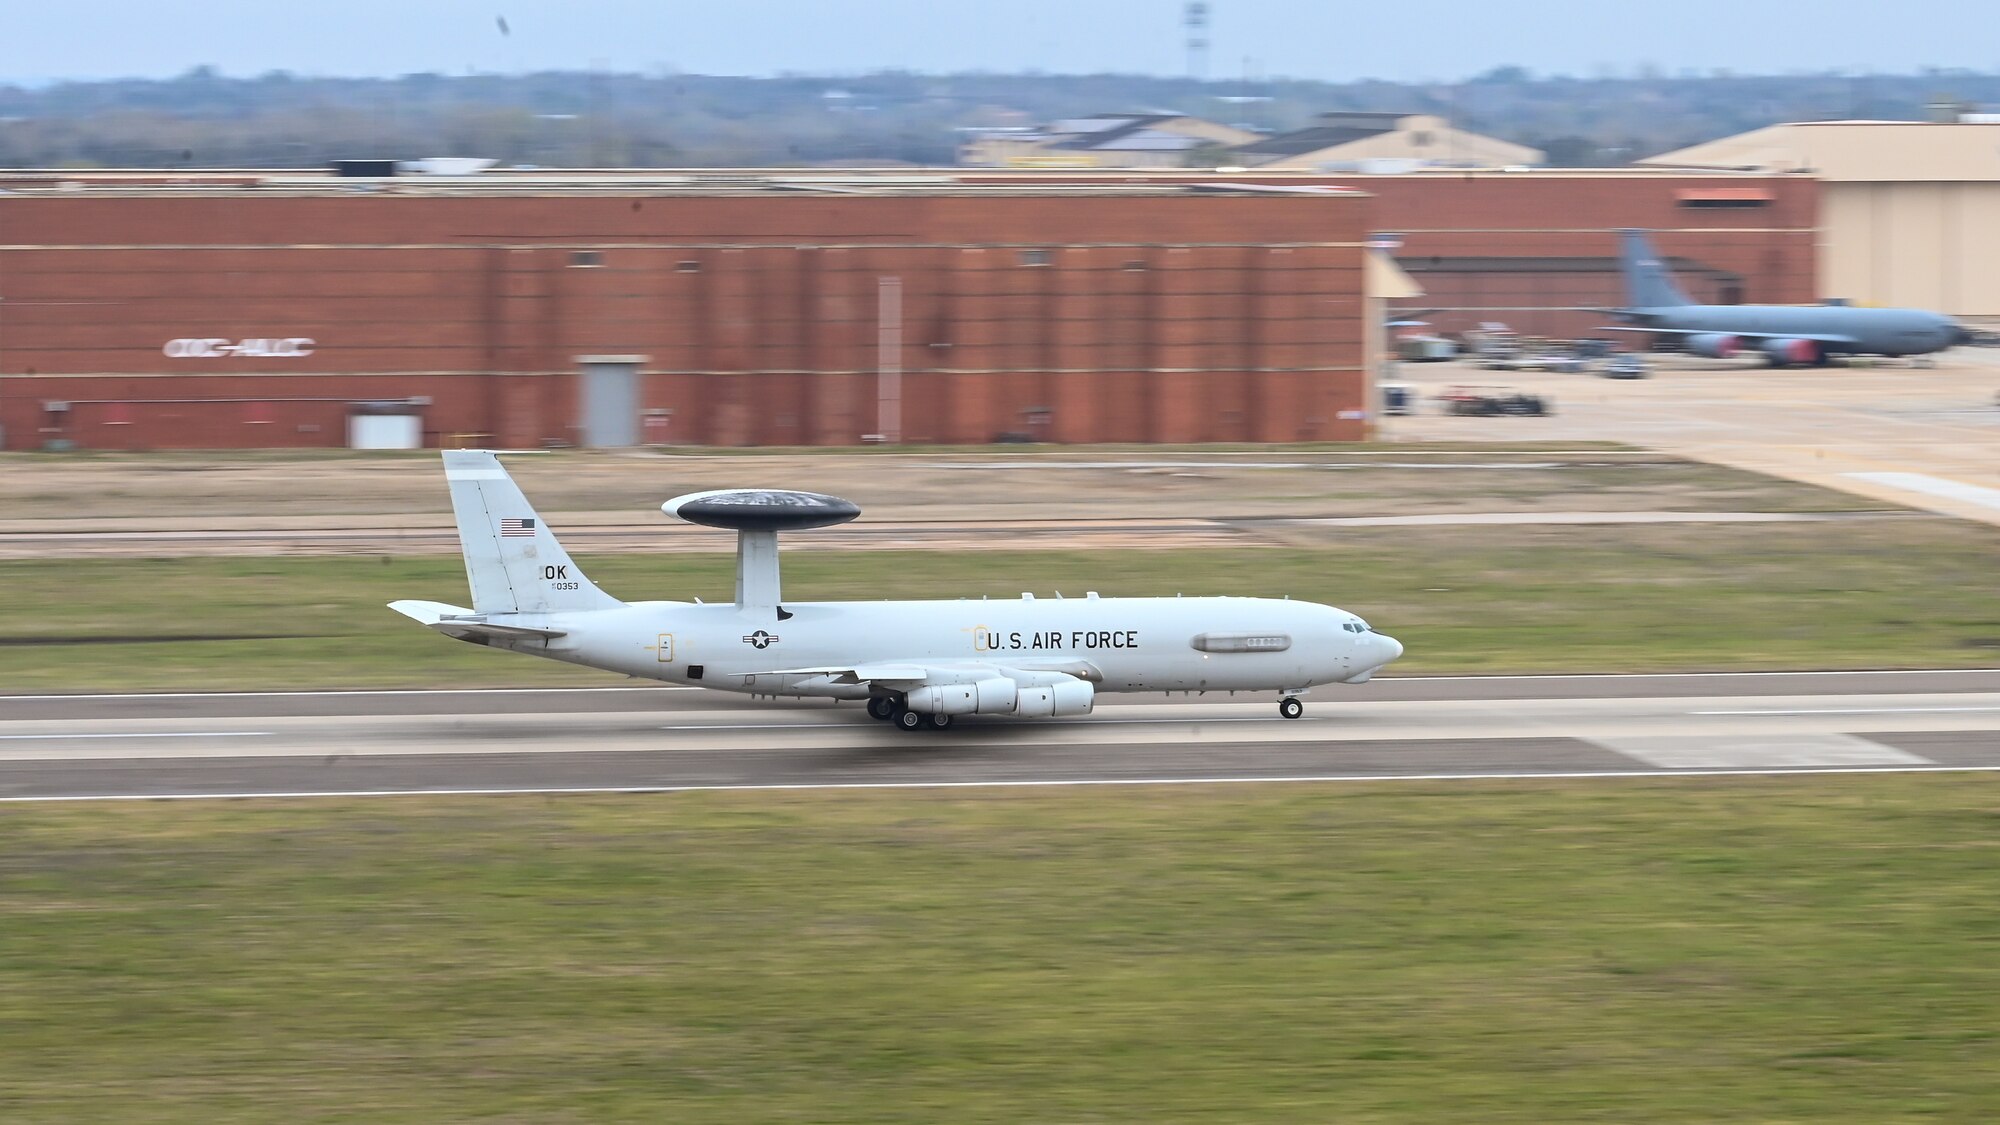 E-3 Sentry aircraft rolling down the runway for takeoff